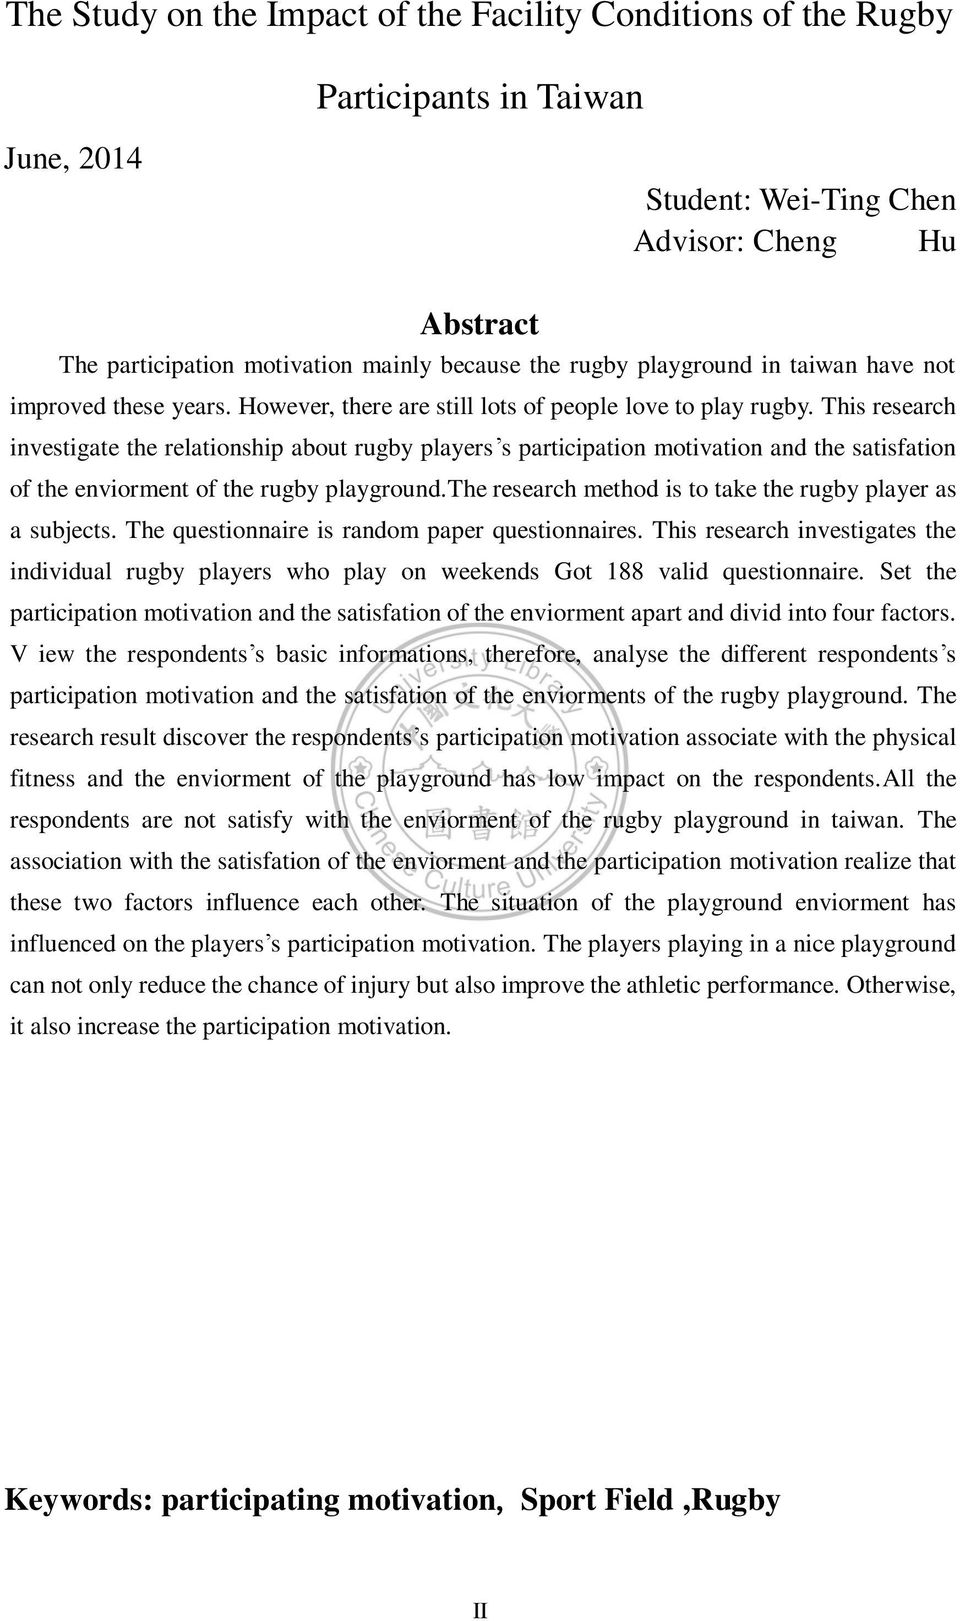 This research investigate the relationship about rugby players s participation motivation and the satisfation of the enviorment of the rugby playground.